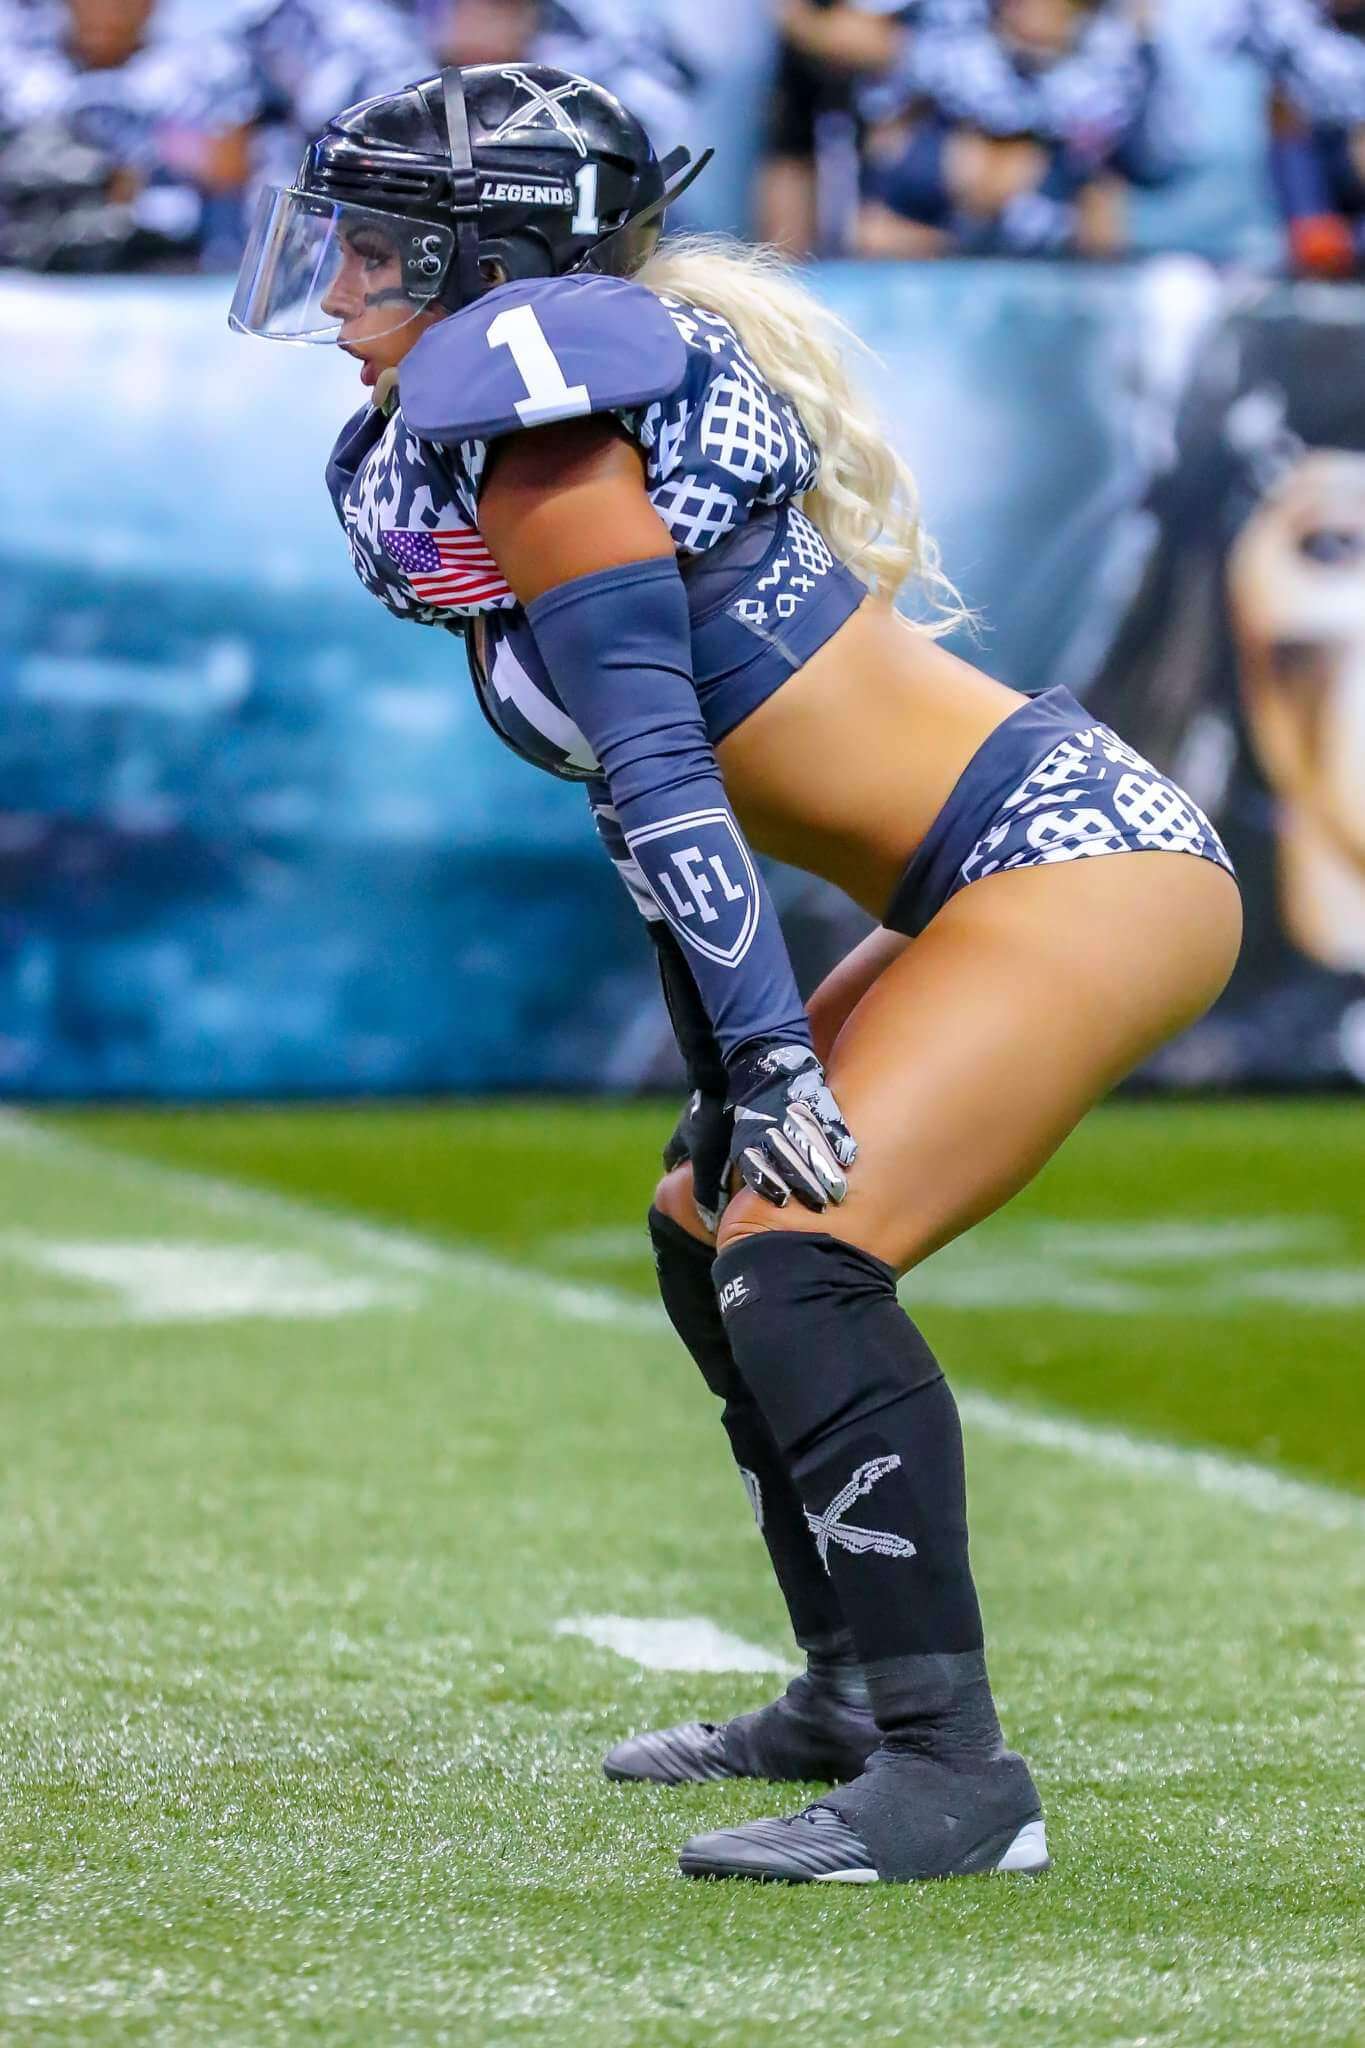 The Legends Football League Beautiful Women And Football, Need We Say Anymore! 56